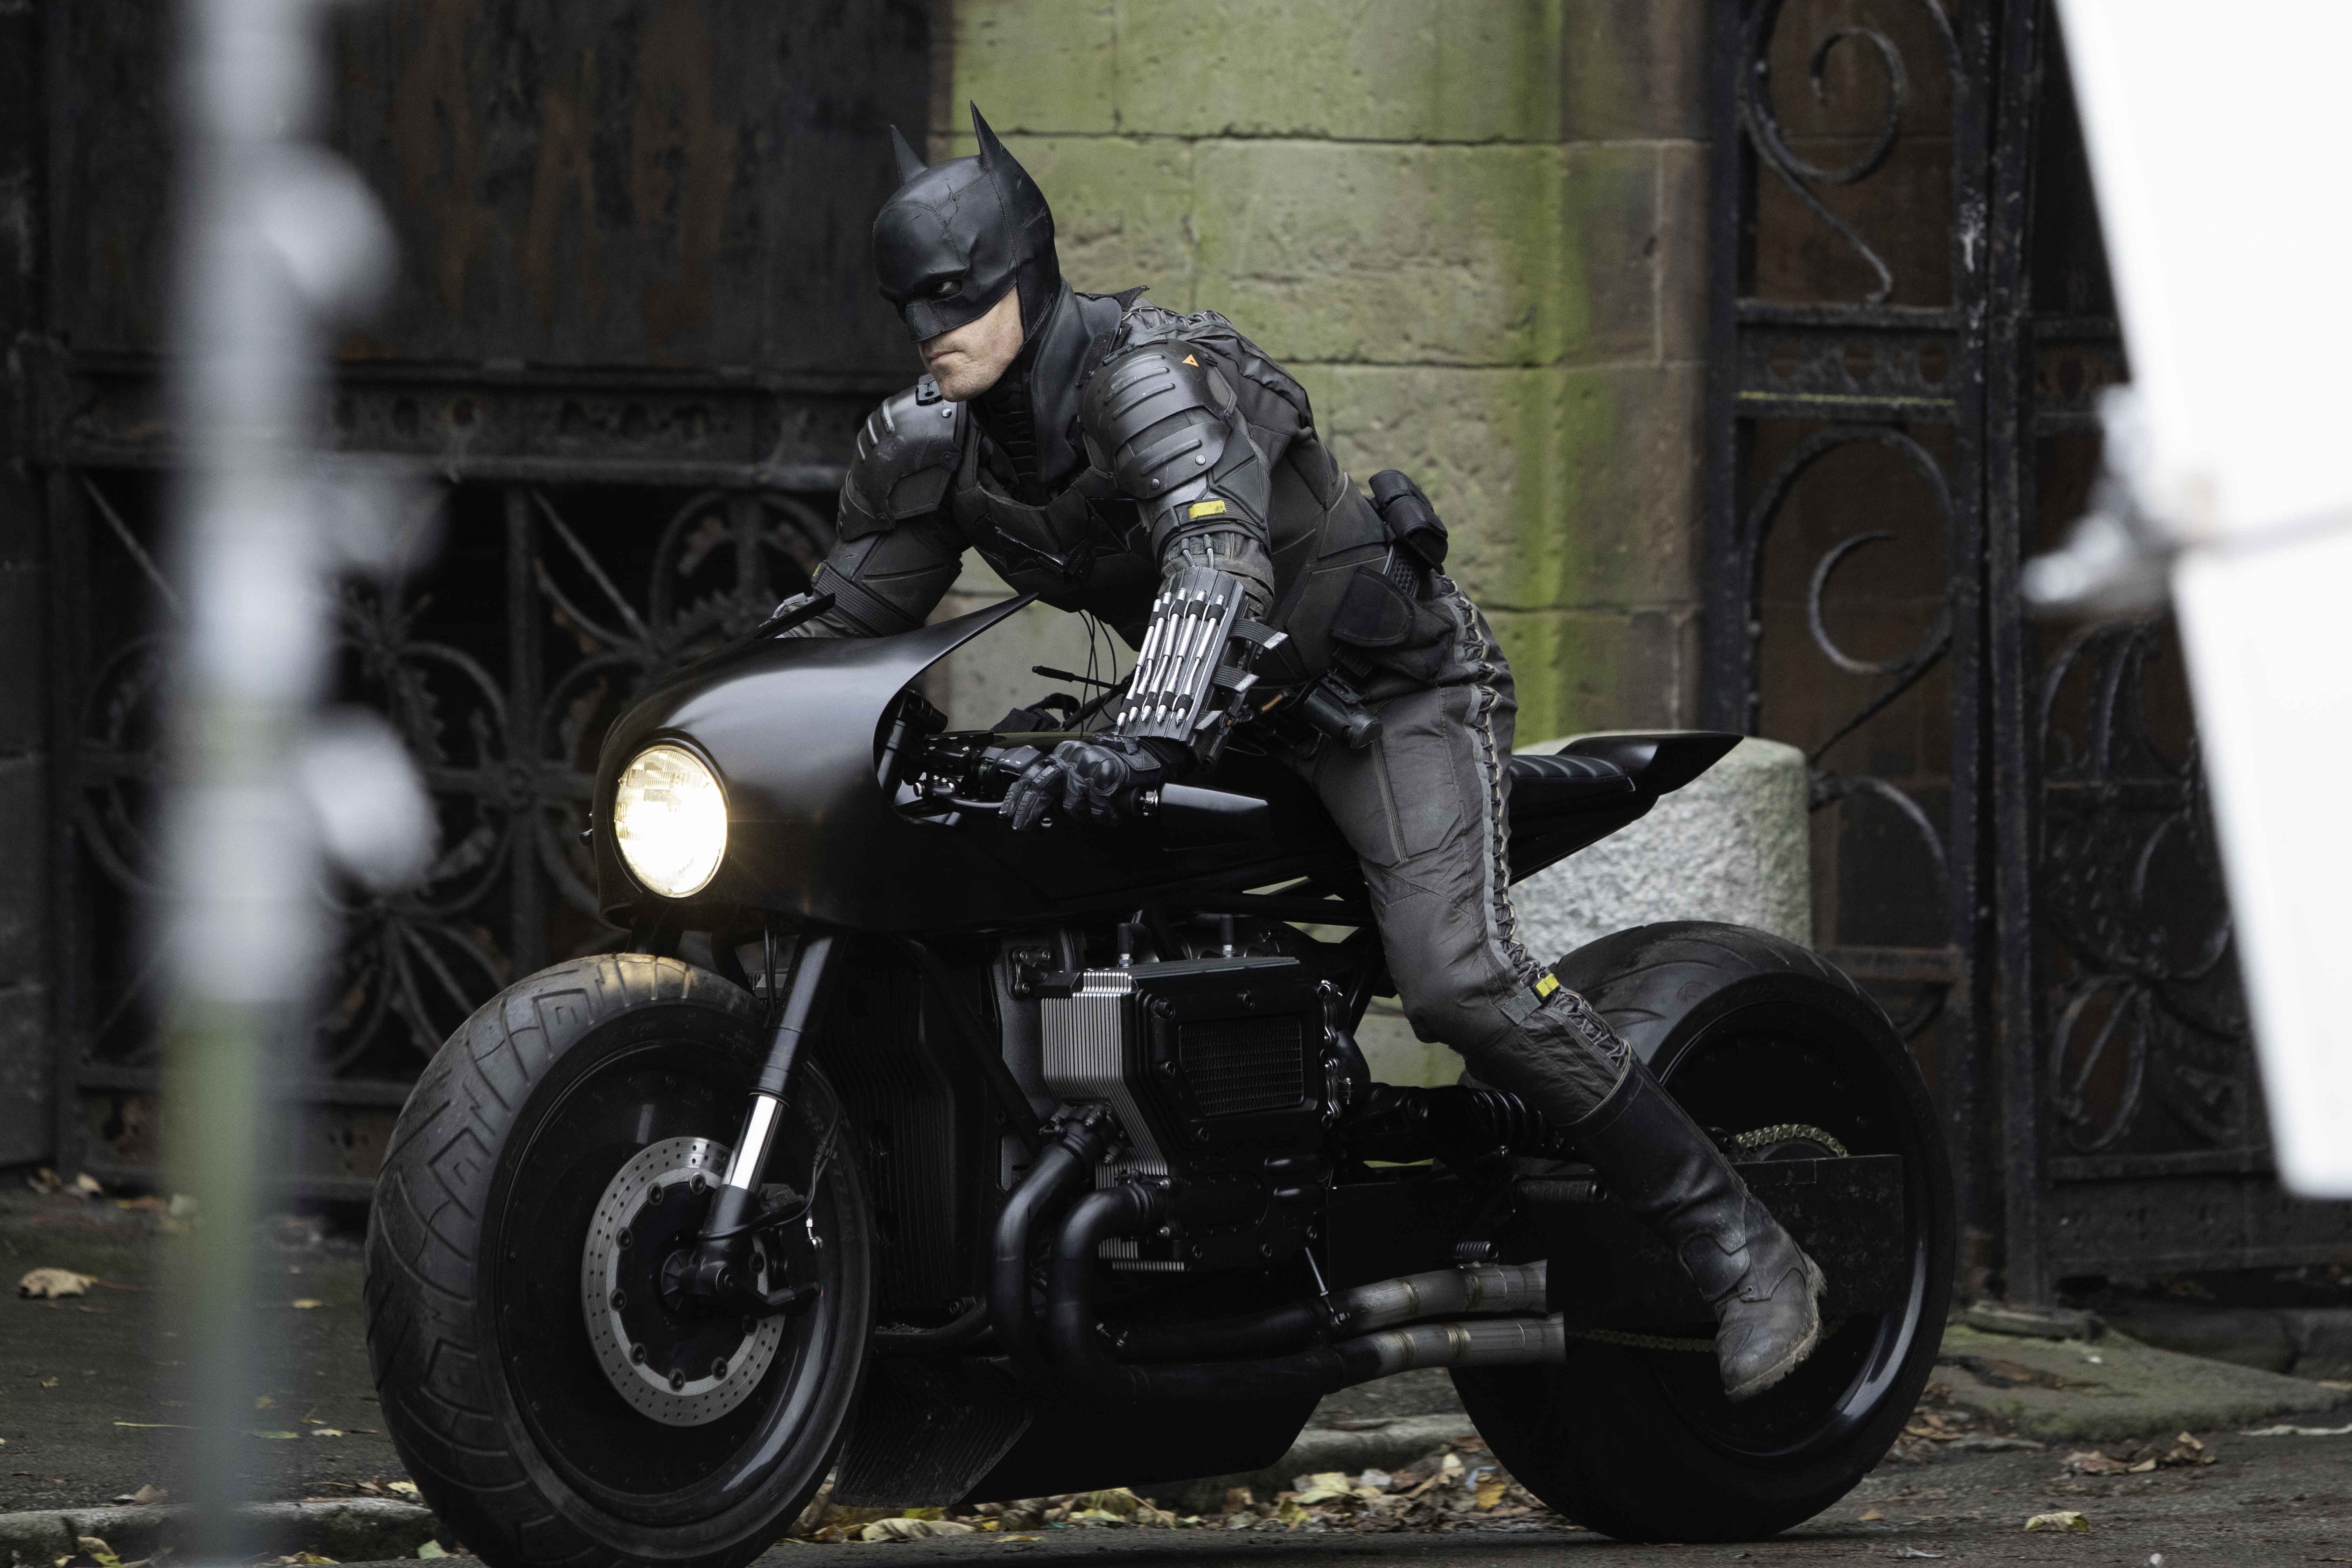 Robert Pattinson's stunt double for 'The Batman' wears the Batman costume and drives his motorcycle. A new trailer for 'The Batman' was released at DC FanDome 2021.